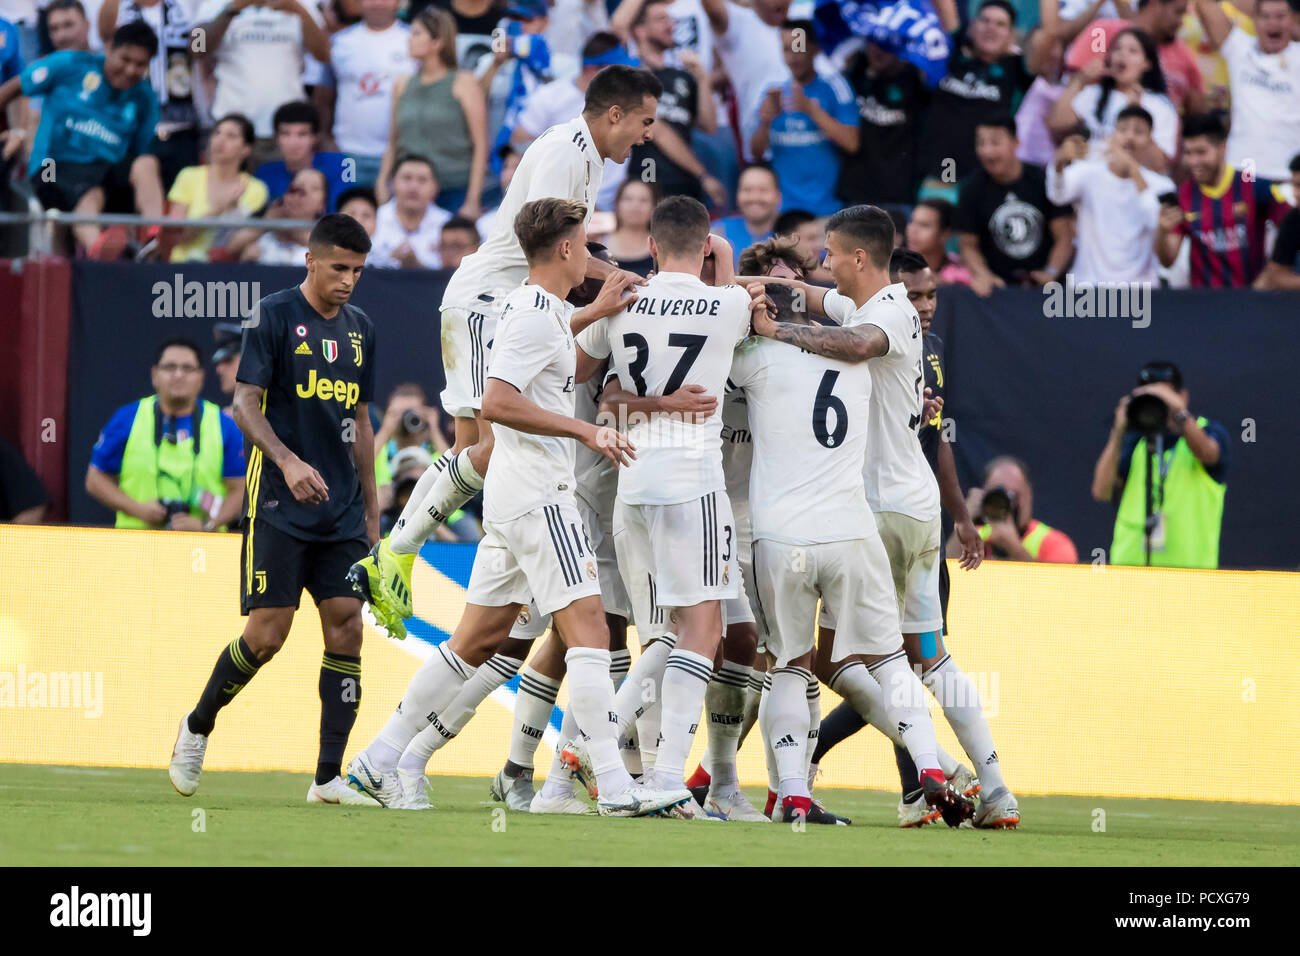 Maryland, USA. 4 August 2018. Real Madrid players celebrate a goal by Real  Madrid midfielder Marco Asensio (20) during an International Champions Cup  match between Real Madrid vs Juventus at FedExField in